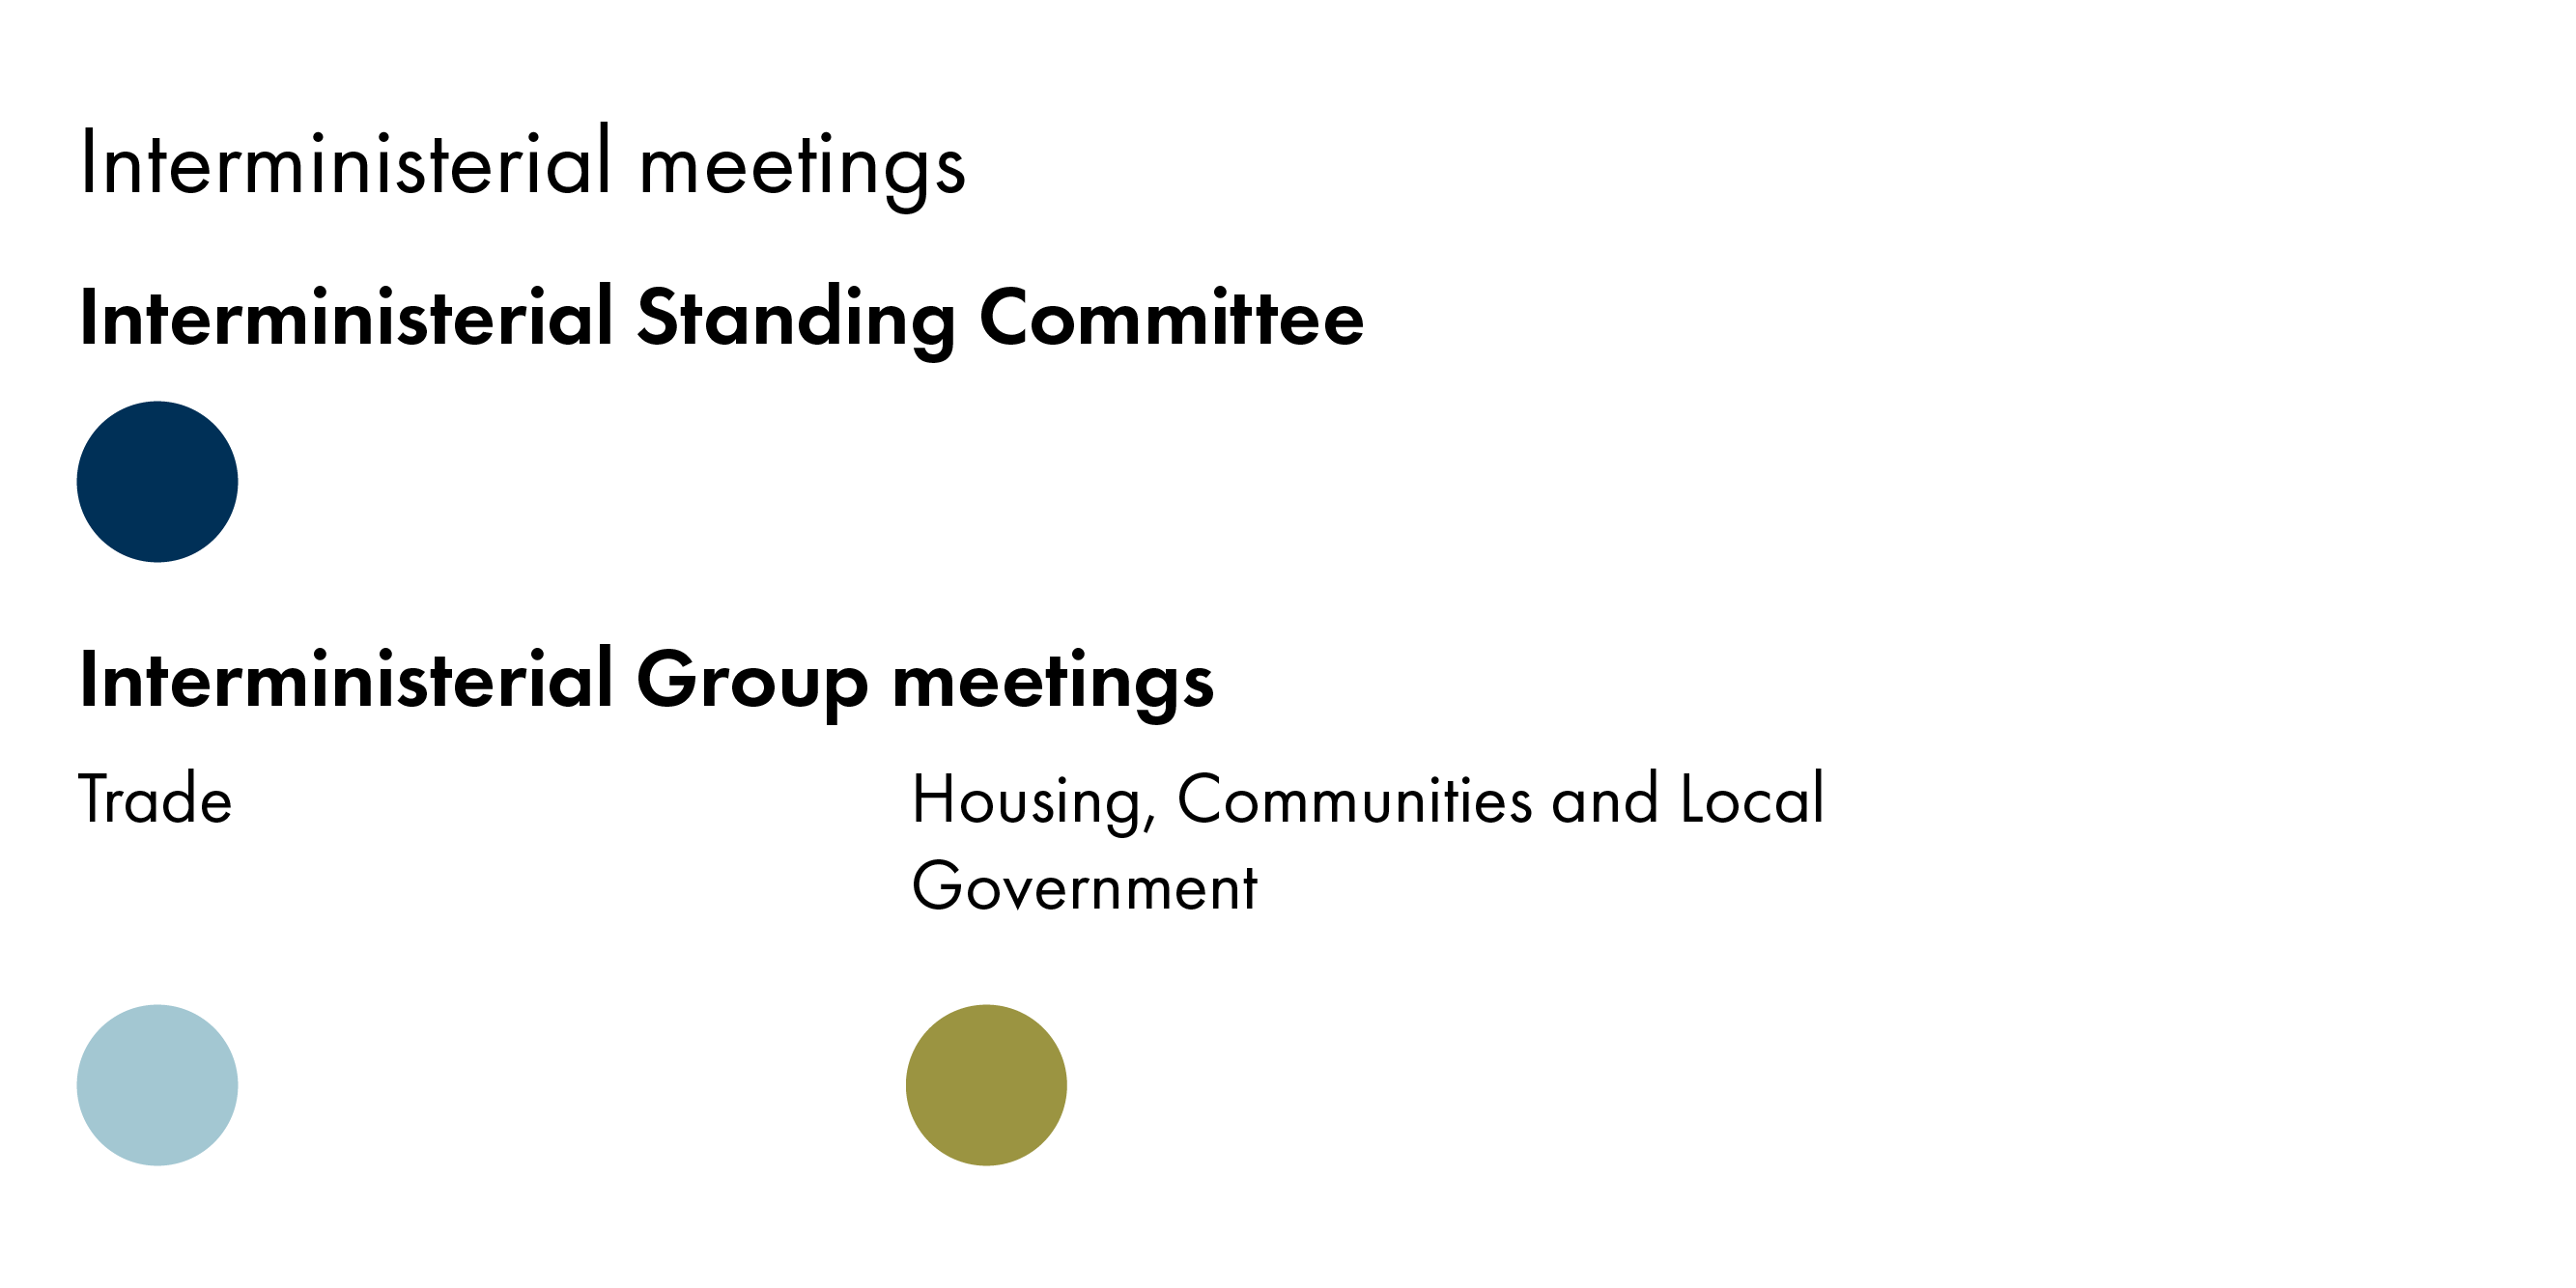 The infographic shows the number of interministerial meetings. There is one circle under ' Interministerial Standing Committee', one circle under 'Interministerial Group Trade',and one circle under 'Interministerial Group Housing, Communities, and Local Government'.